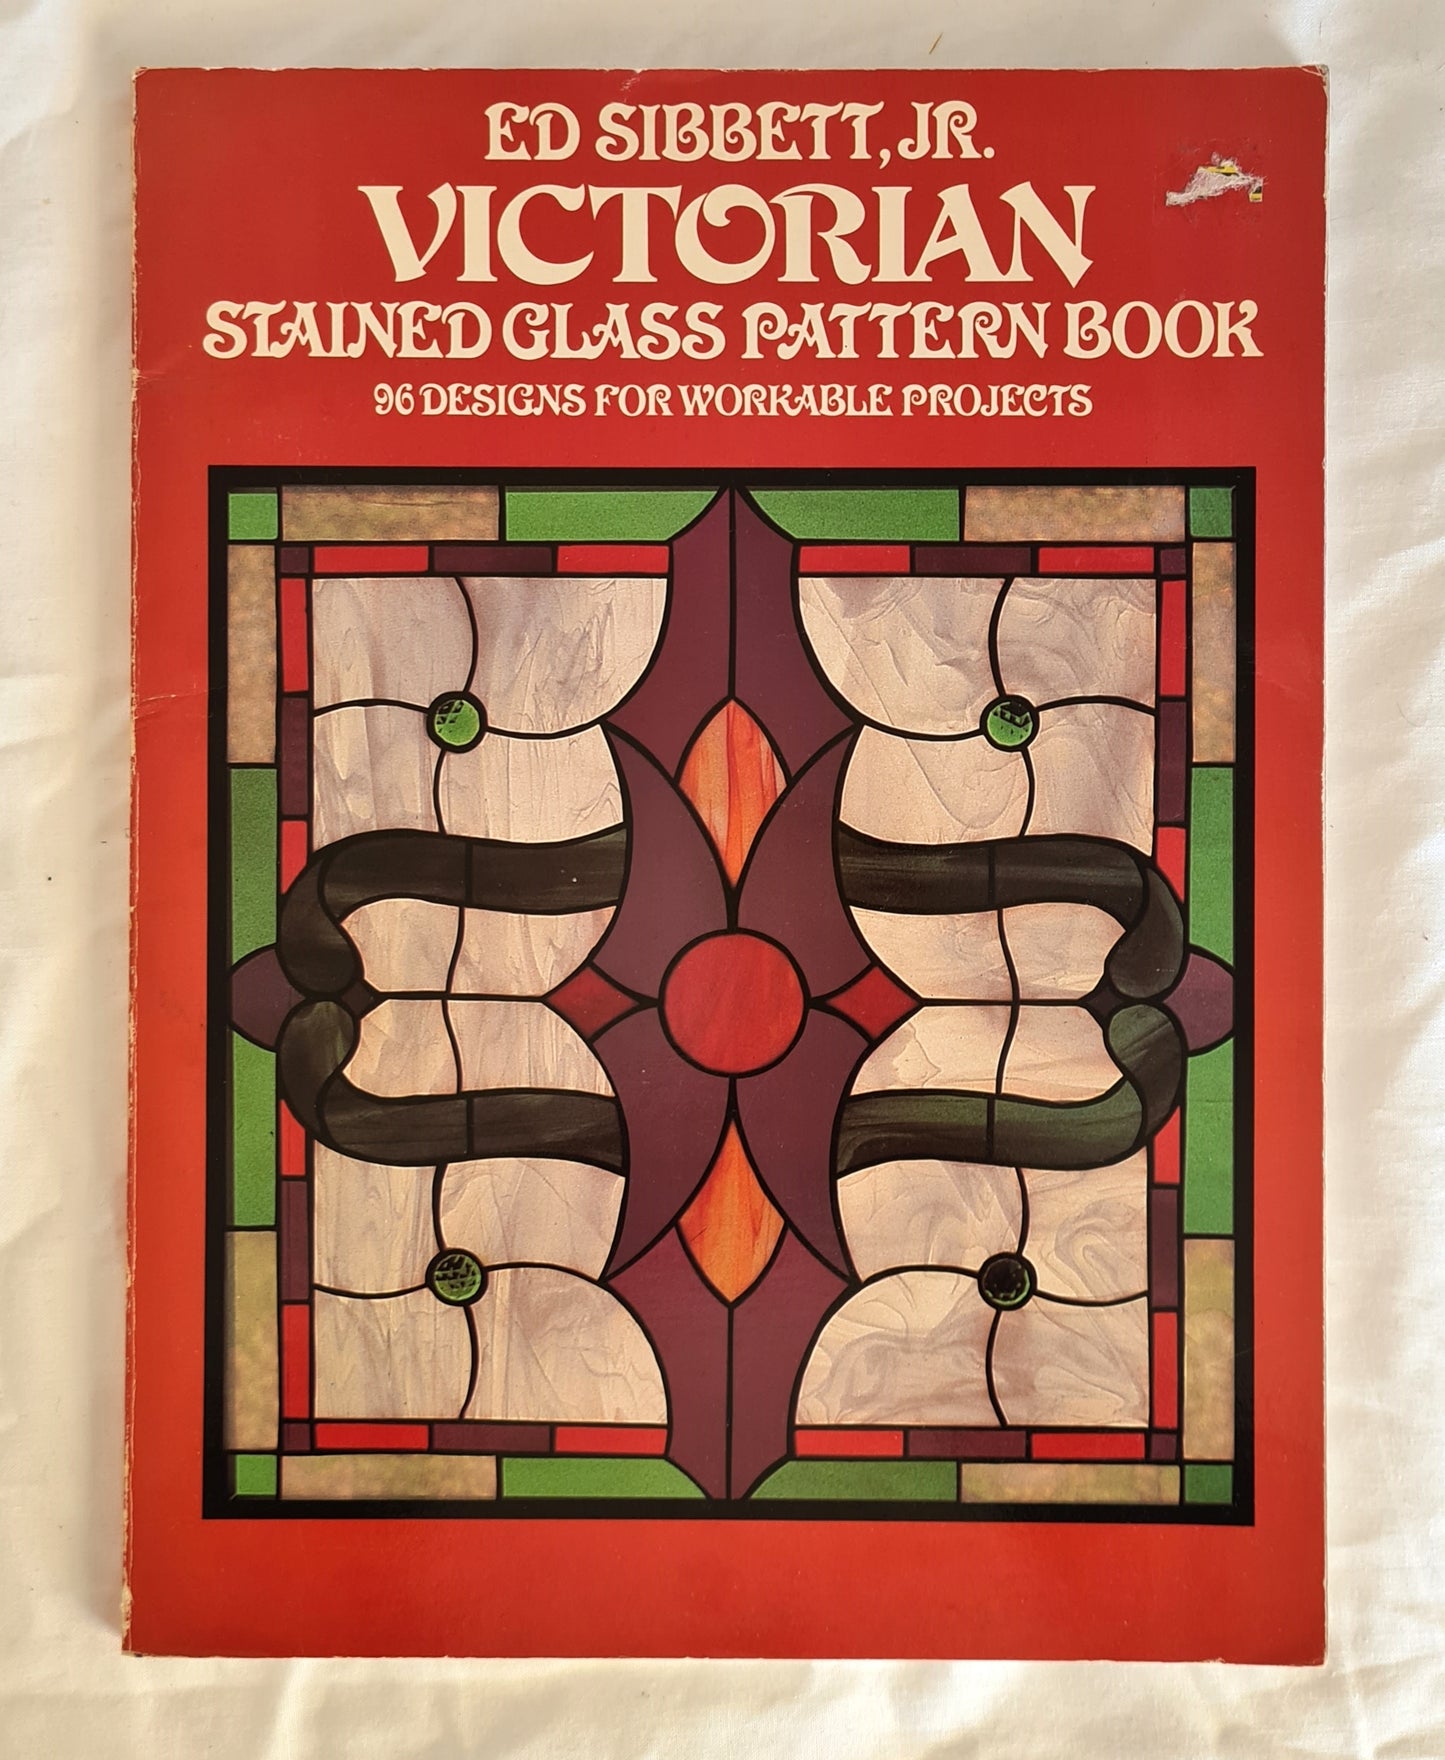 Victorian Stained Glass Pattern Book  96 Designs for Workable Projects  by Ed Sibbett, JR.